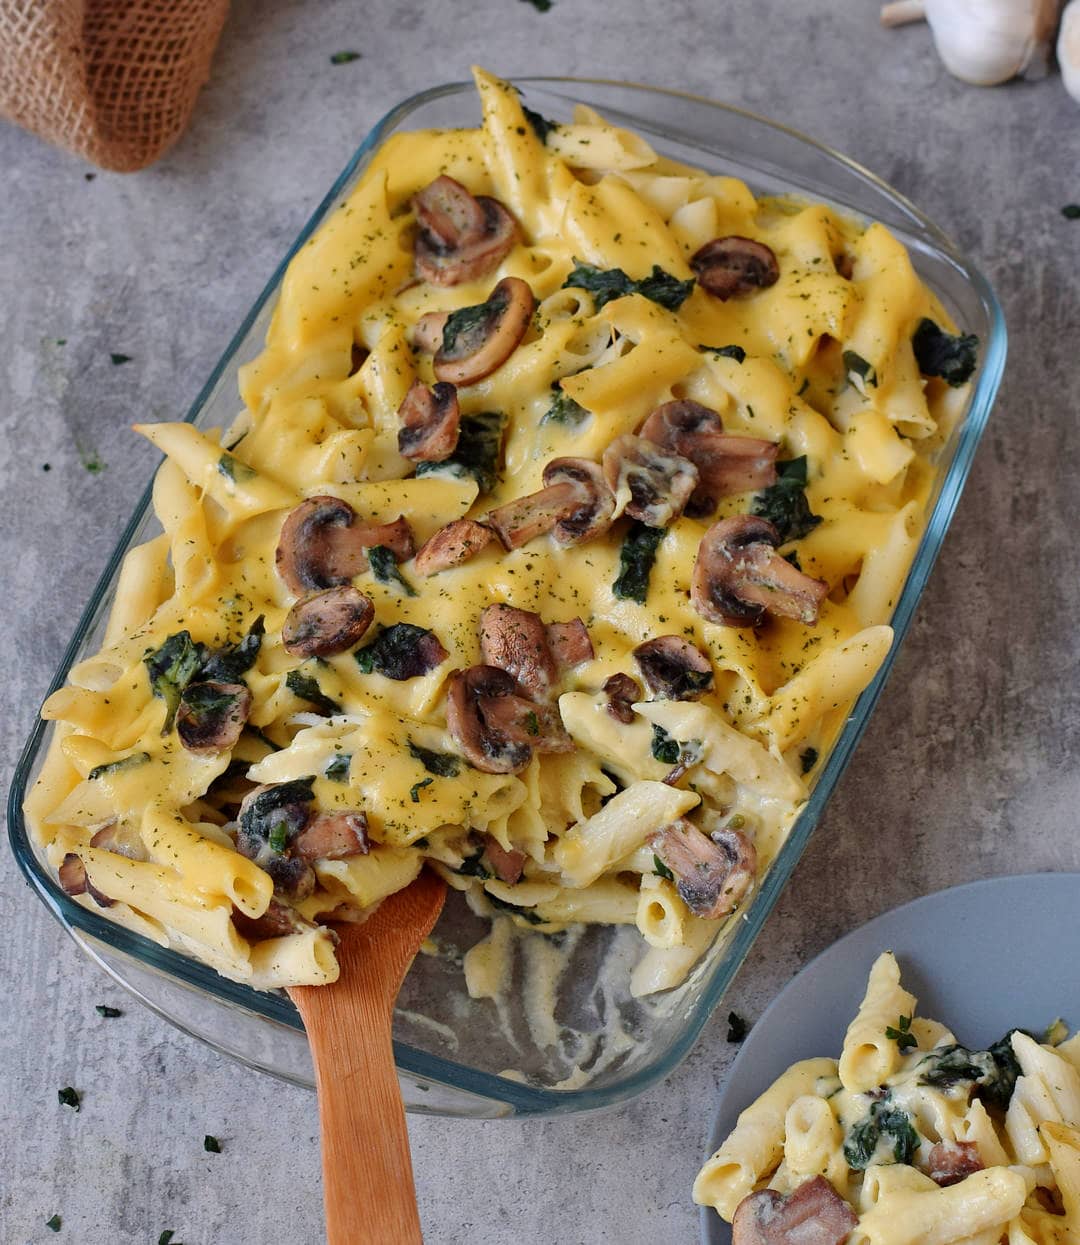 Vegan pasta bake with mushrooms and spinach in casserole dish